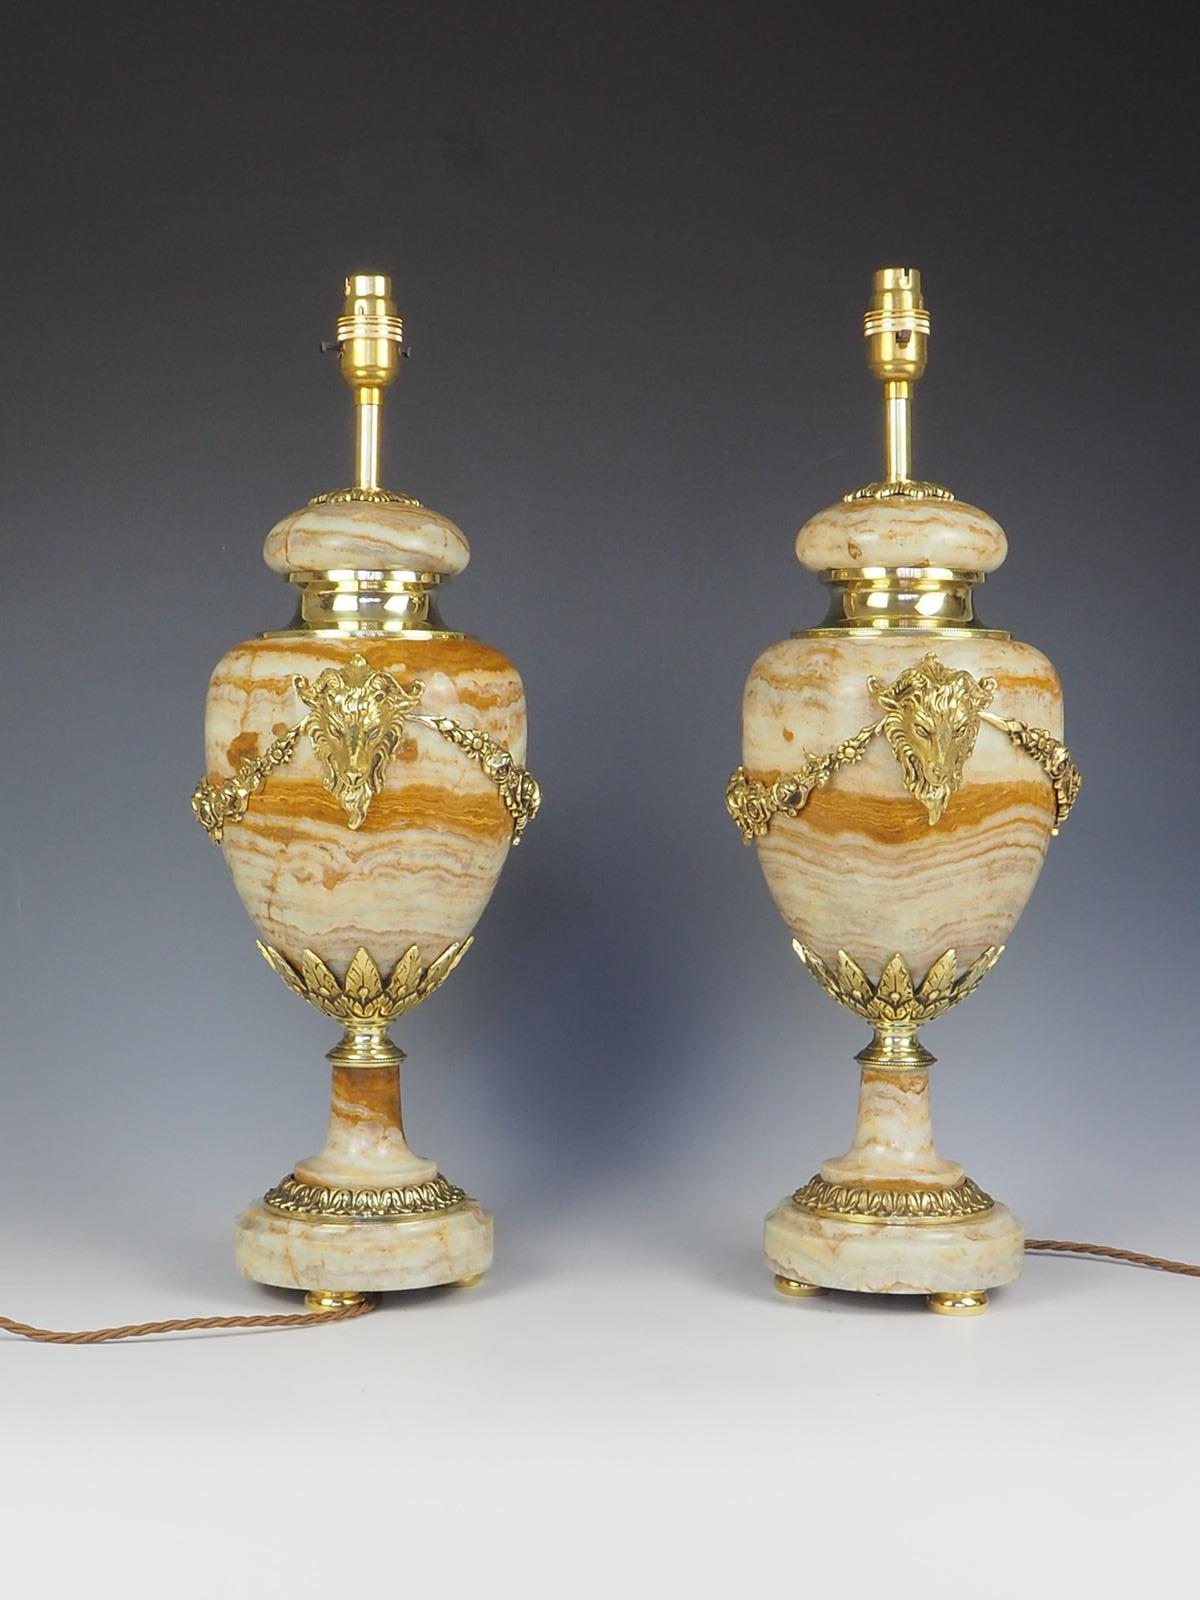 Antique Pair of French Ormolu Cassolette Marble Table Lamps For Sale 1